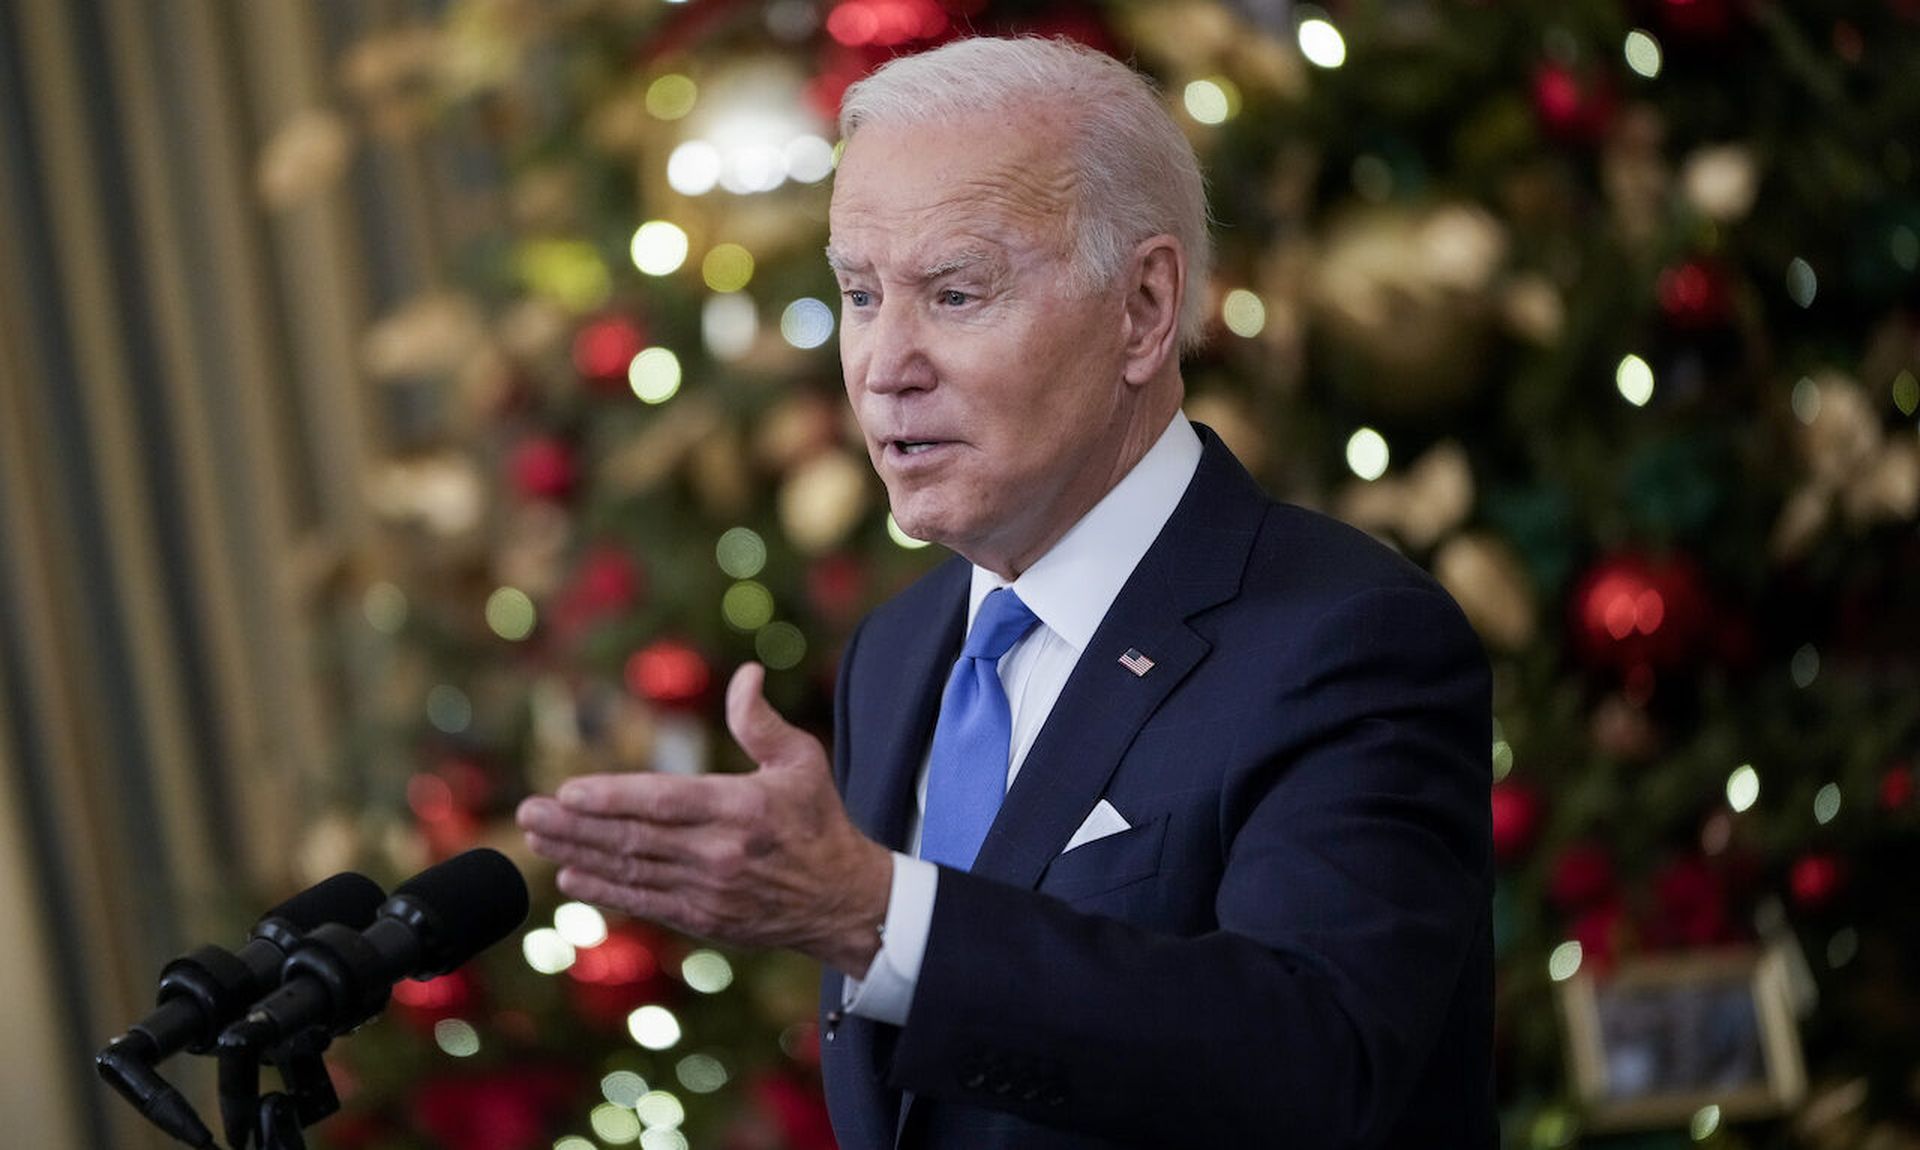 Today’s columnist, Amitai Ratzon of Pentera, says SecValOps offers the next step in a continued proactive security approach, a tone that’s been set all year with the Biden administration’s executive order earlier this year. (Photo by Drew Angerer/Getty Images)